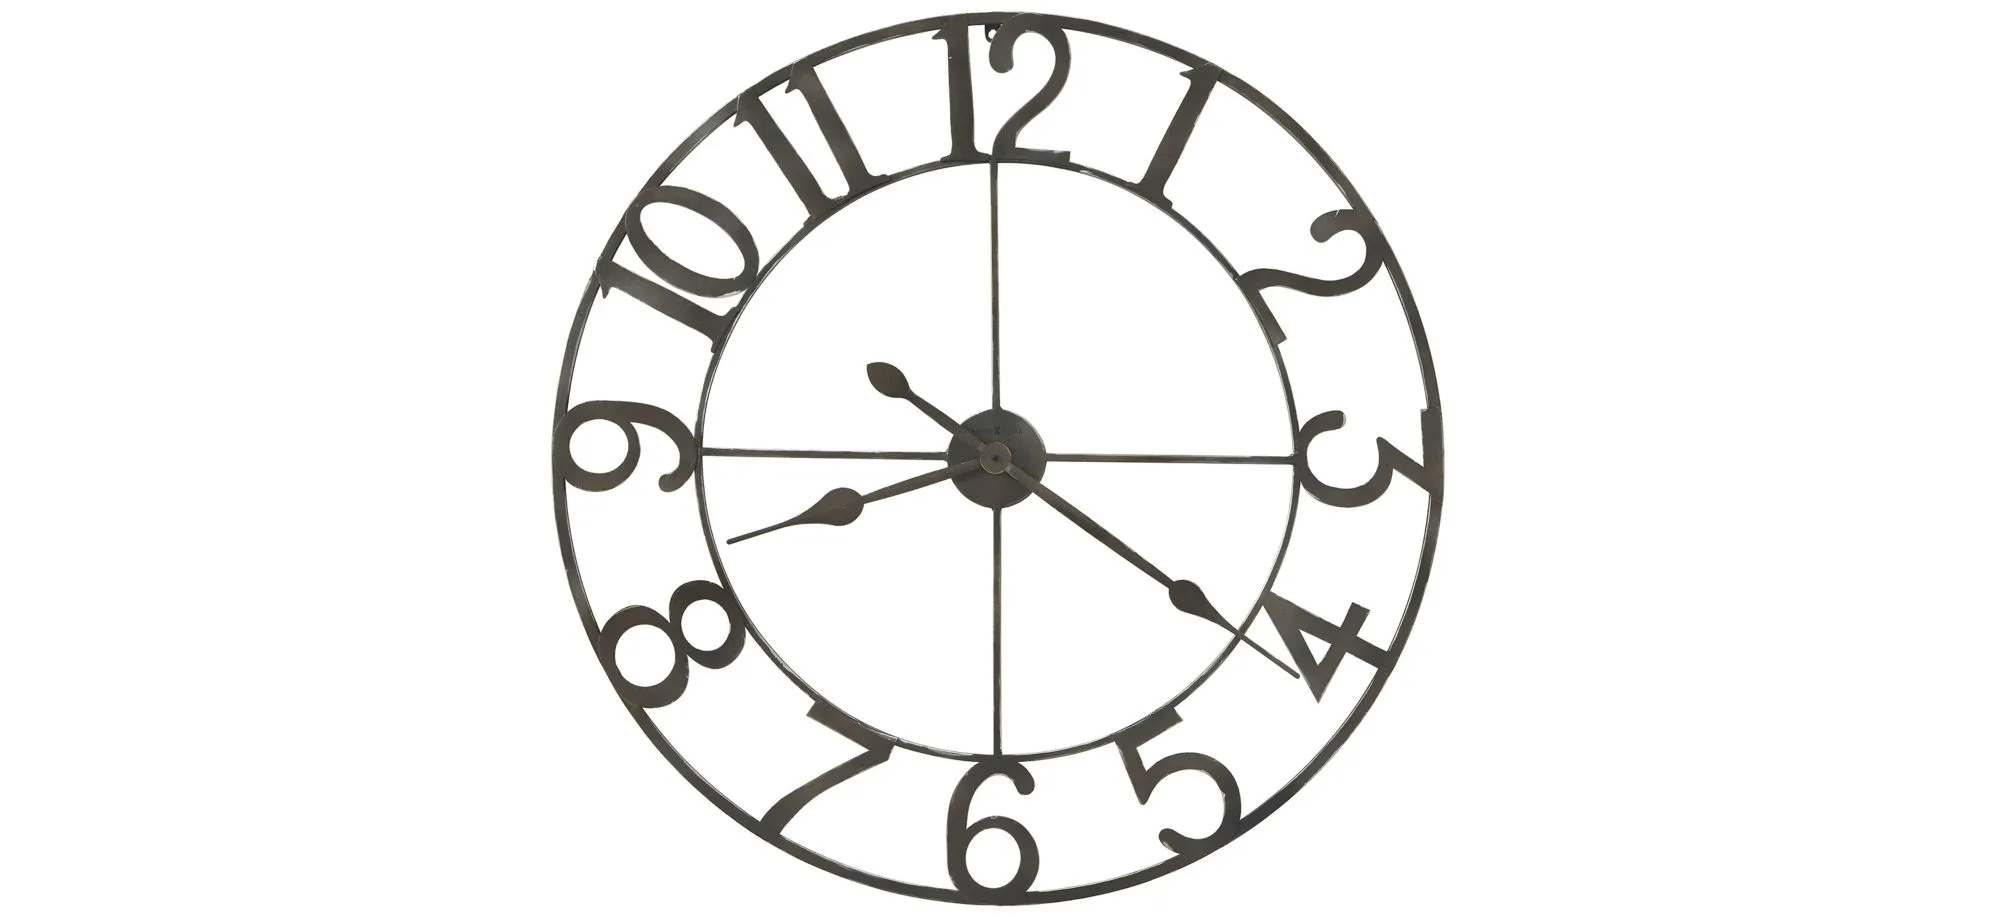 Artwell Wall Clock in Brown by Howard Miller